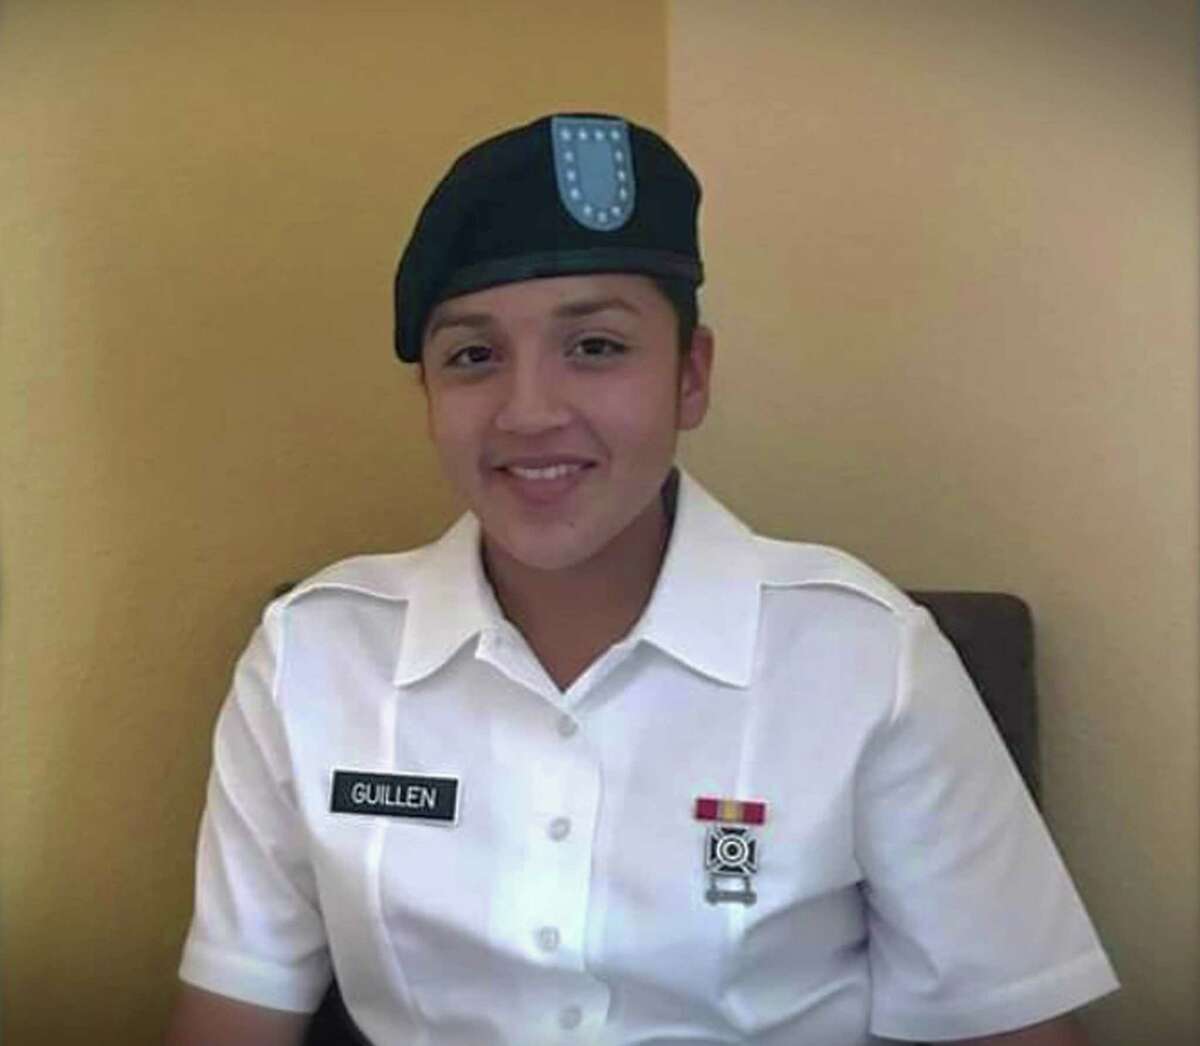 Vanessa Guillen: Her Life And Fort Hood Murder: Vanessa Guillen was a 20-year-old army specialist who was murdered at Fort Hood. Here's what to know about her bludgeoning death and her family's response.